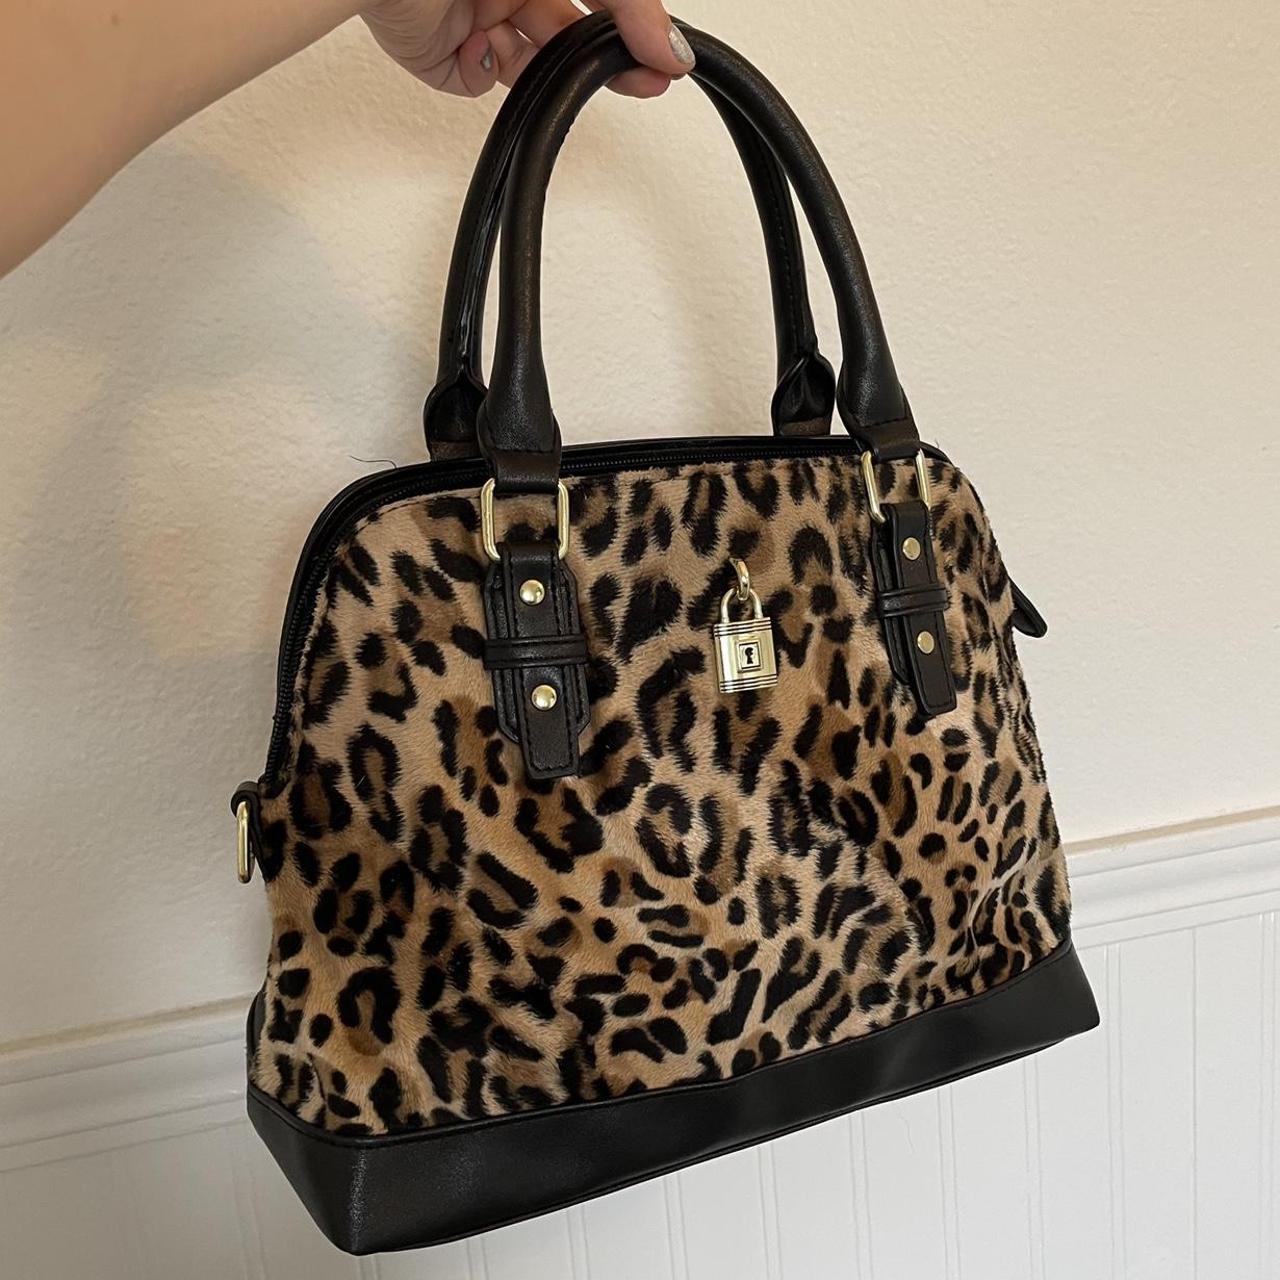 Grow A Note Gift Card Holder - Leopard Purse Design | EcoPlanet / EcoChoices